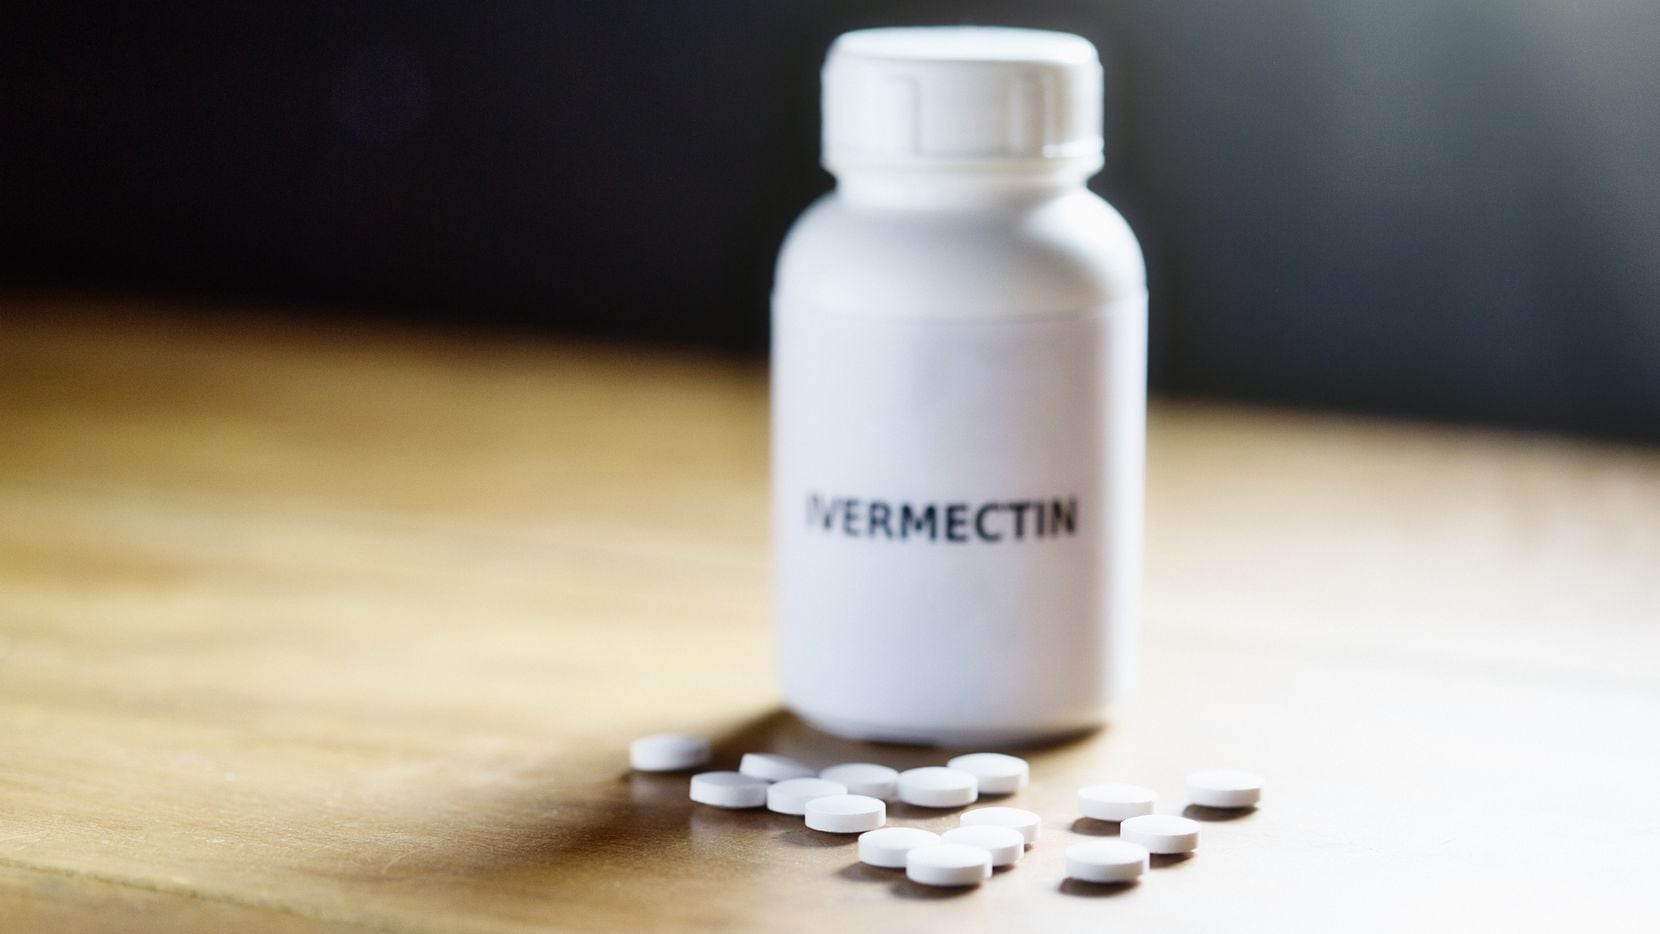 Ivermectin is flying off shelves in North Texas, even as health authorities are warning people against taking the livestock drug.